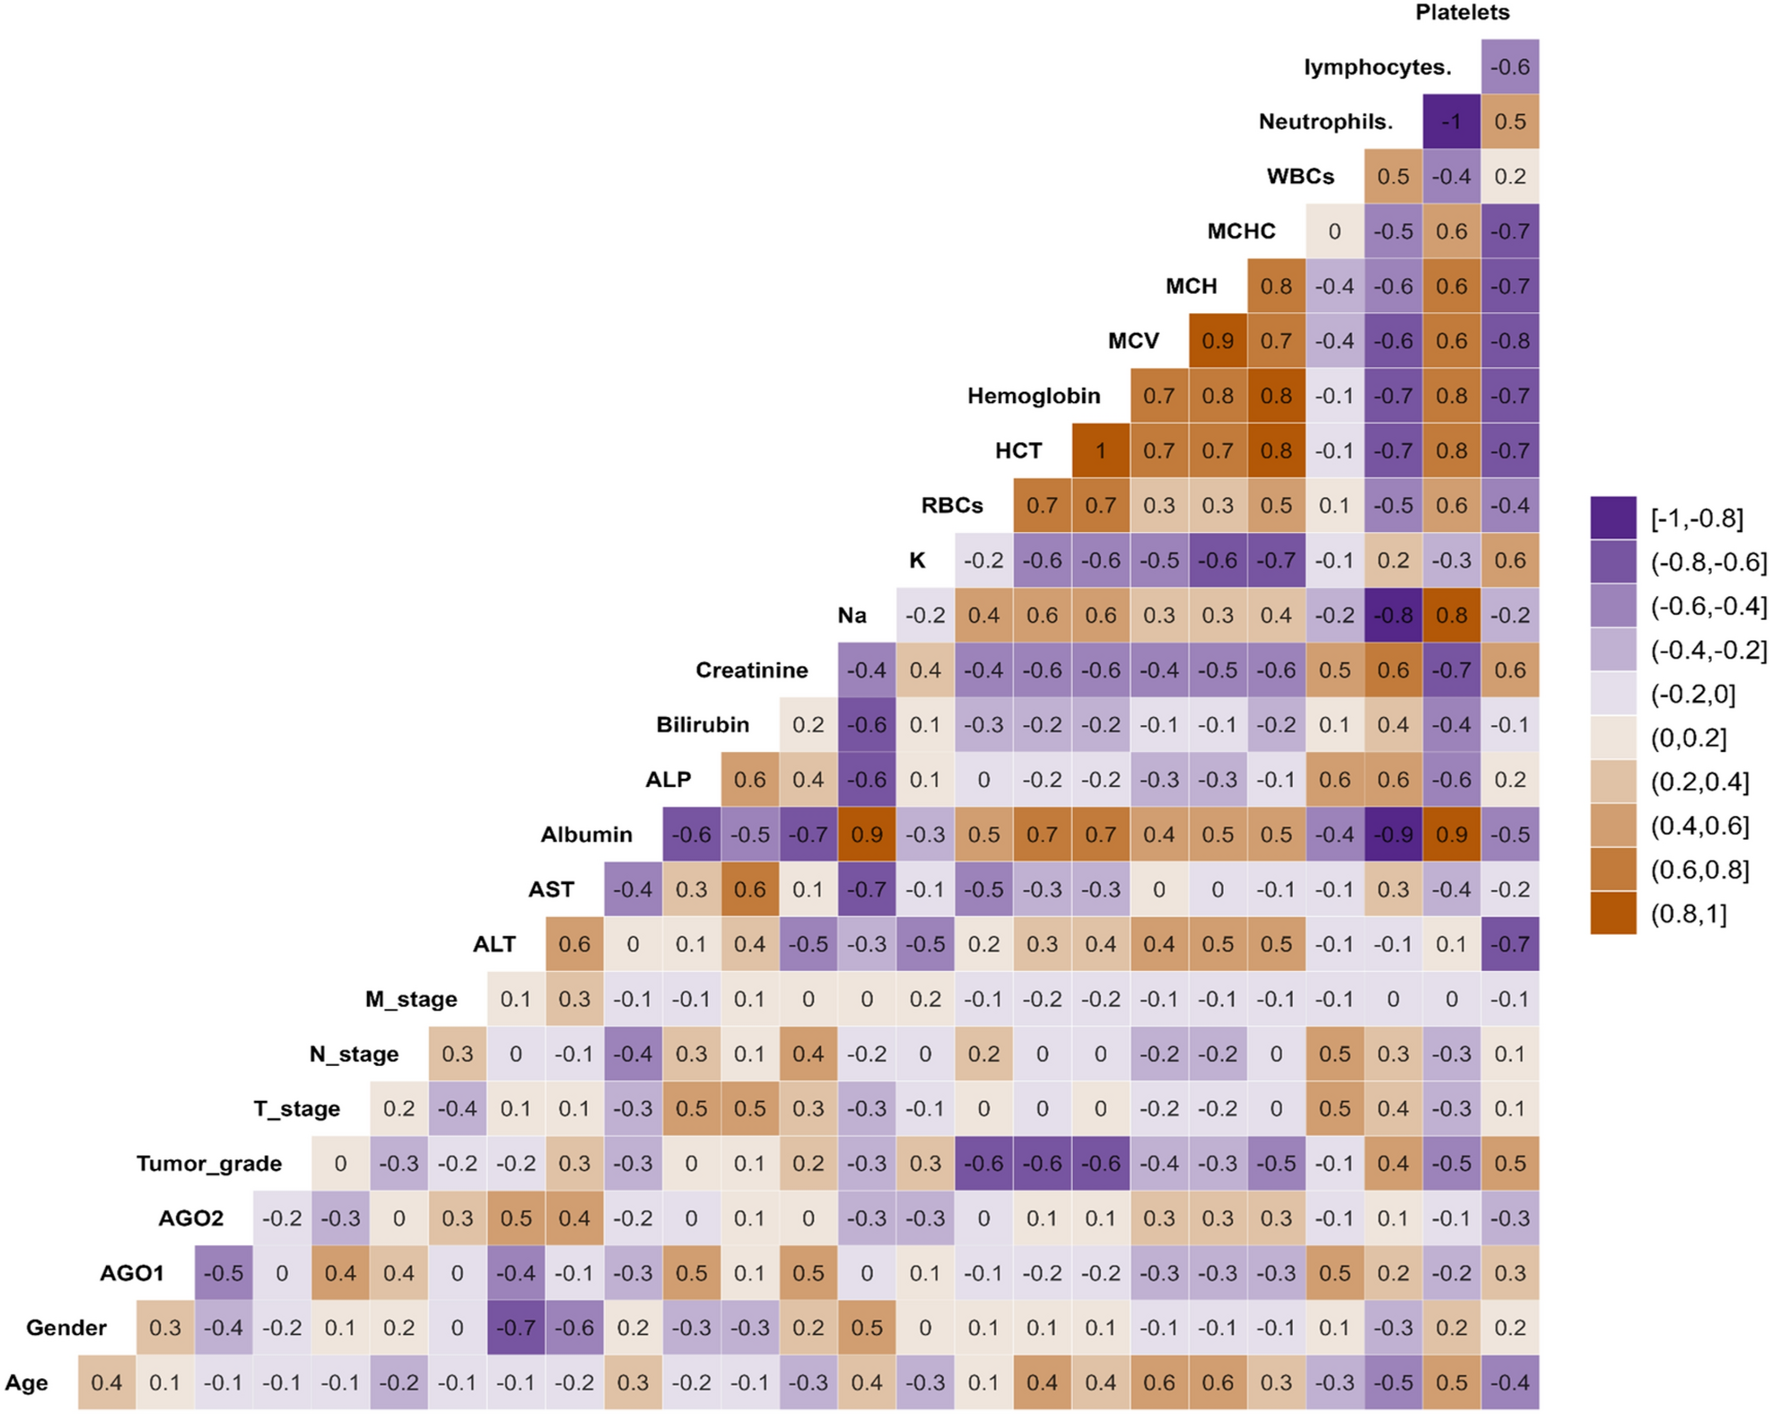 Genetic Variants of AGO1*rs595961 and AGO2*rs4961280 with Susceptibility to Bladder Carcinoma